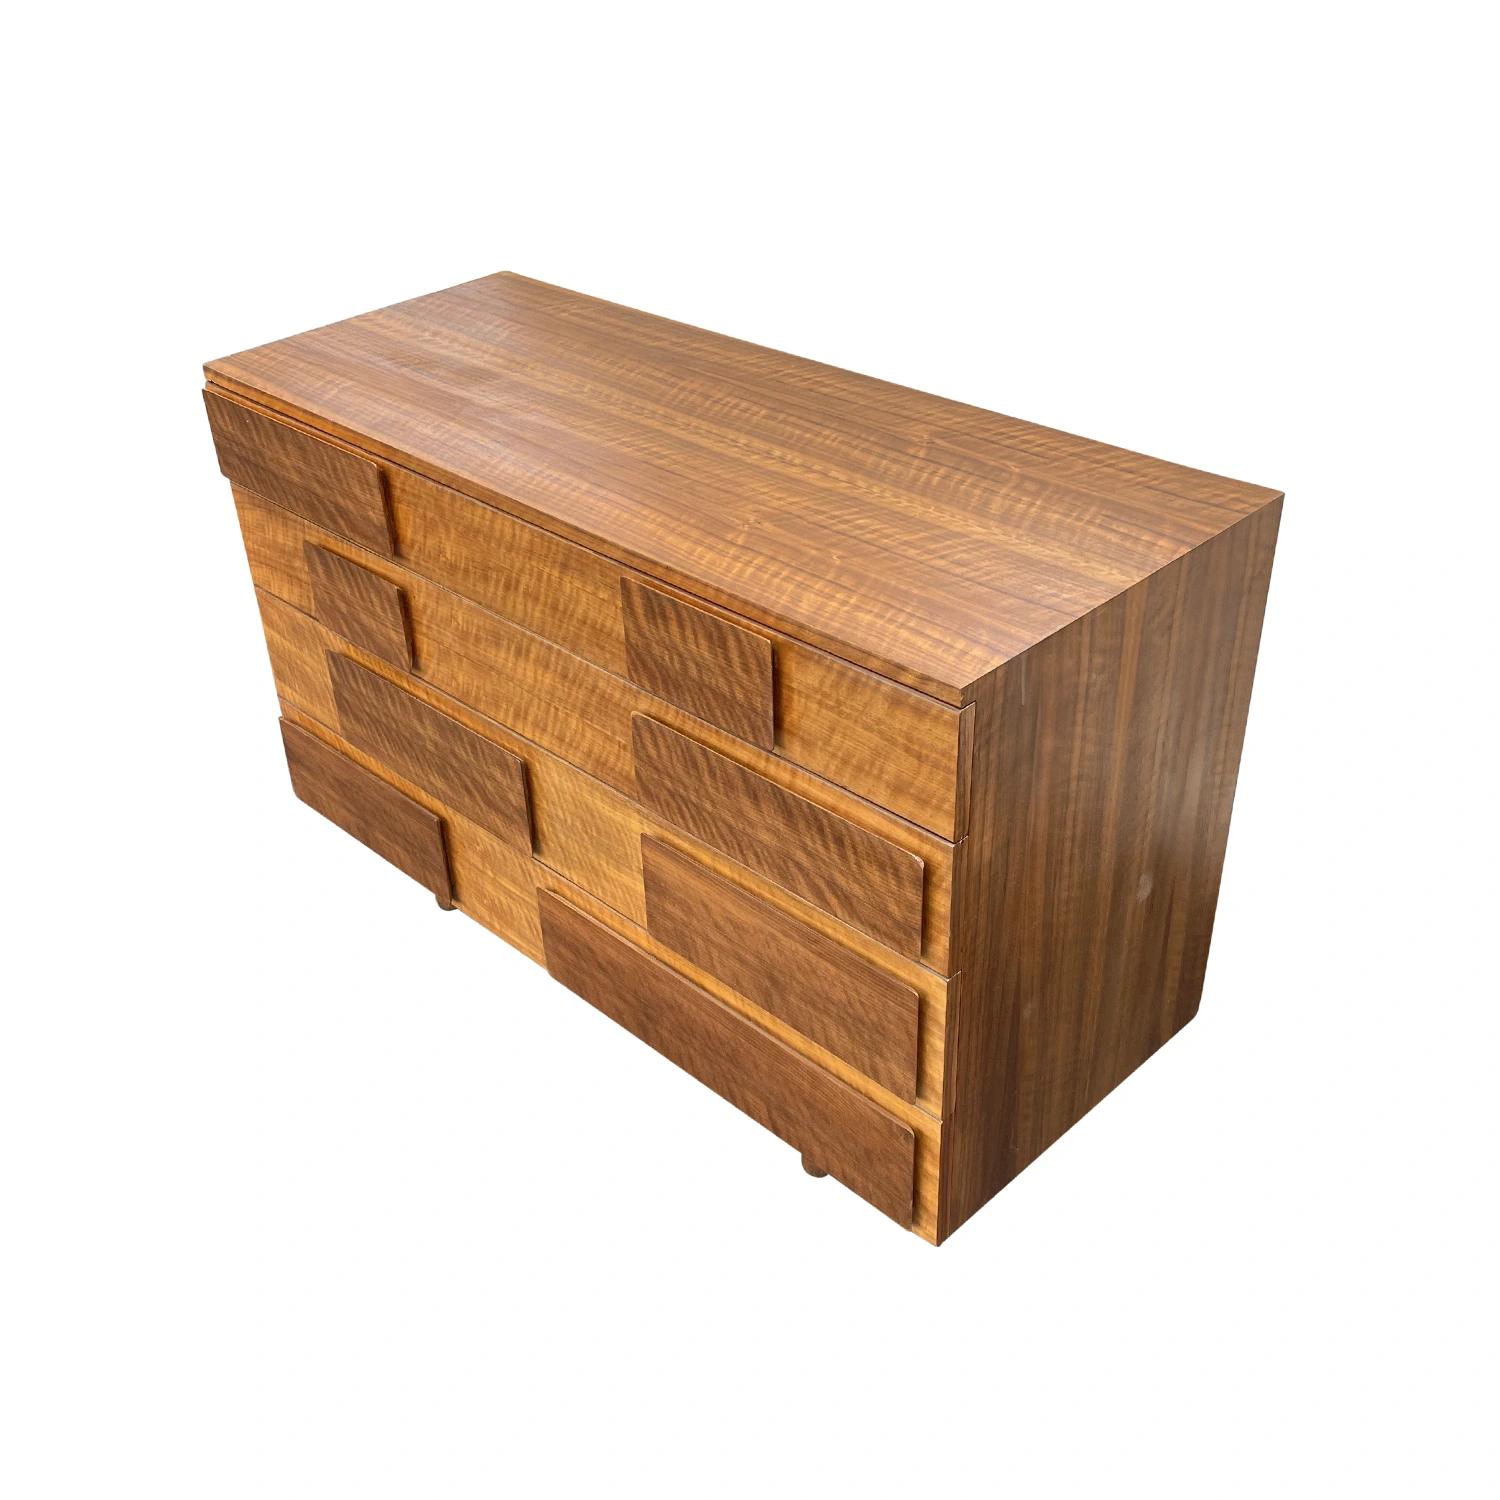 20th Century Brown Italian Walnut M. Singer & Sons Dresser, Cabinet by Gio Ponti In Good Condition For Sale In West Palm Beach, FL